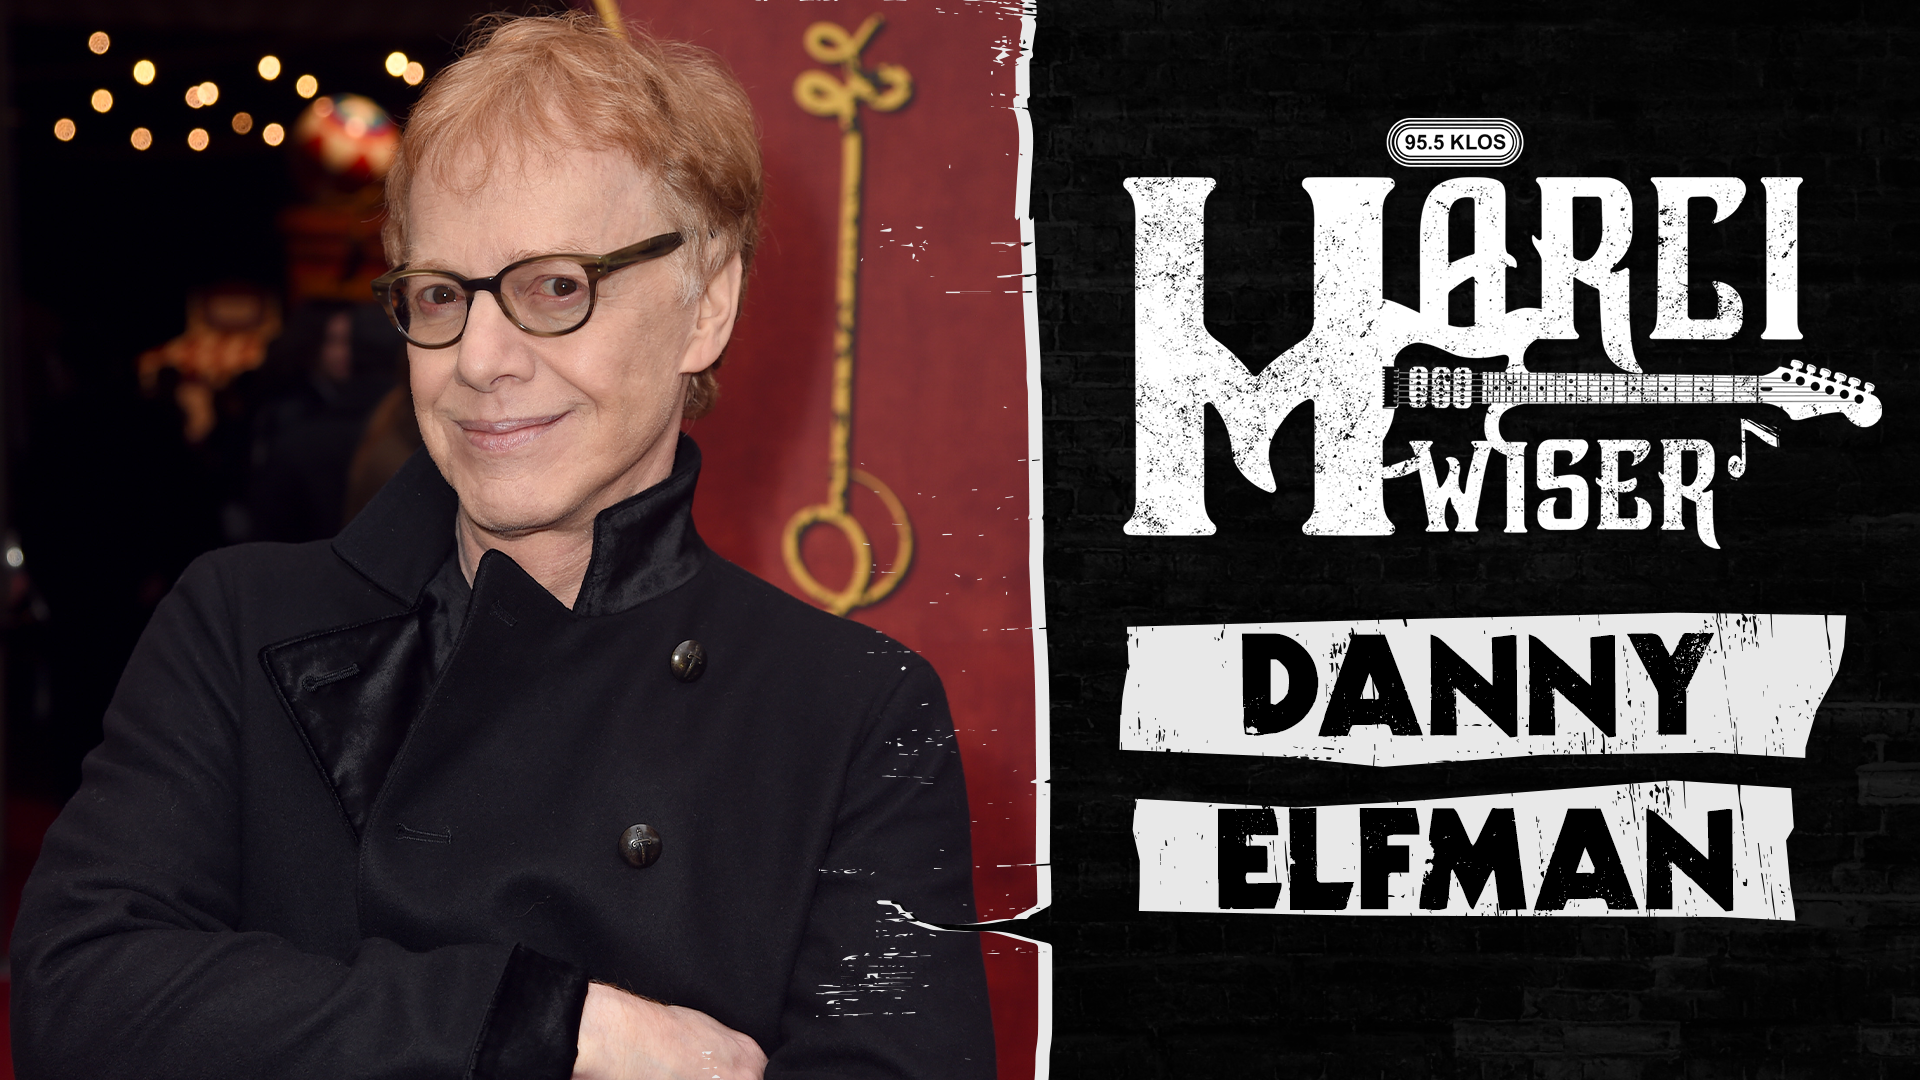 Danny Elfman Talks Oingo Boingo & Who He’d Want To Play Him If An Elfman Movie Was Ever Made